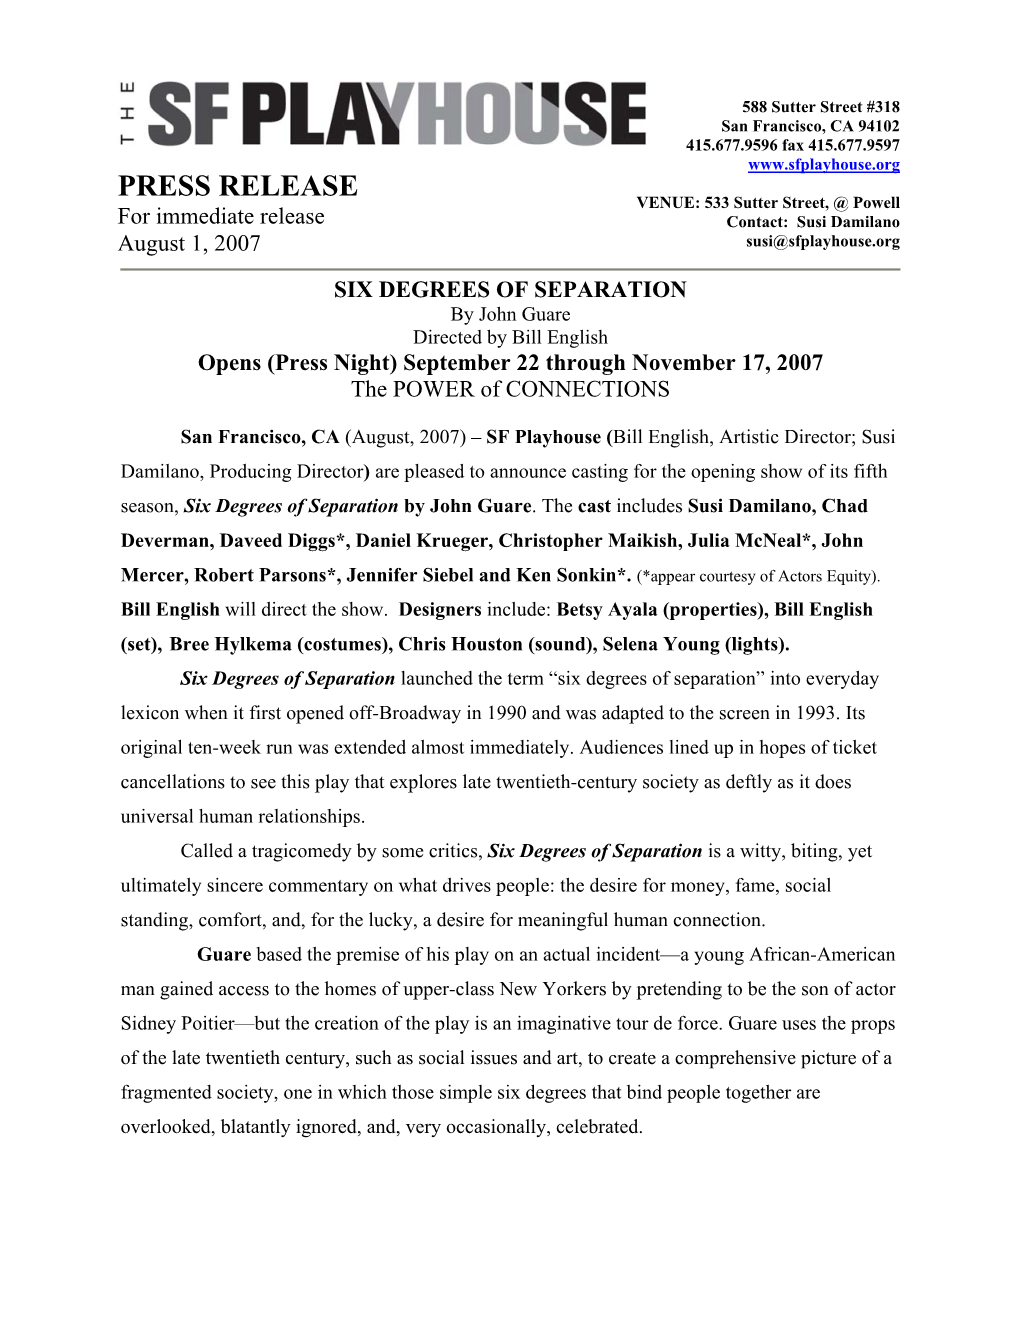 PRESS RELEASE VENUE: 533 Sutter Street, @ Powell for Immediate Release Contact: Susi Damilano August 1, 2007 Susi@Sfplayhouse.Org